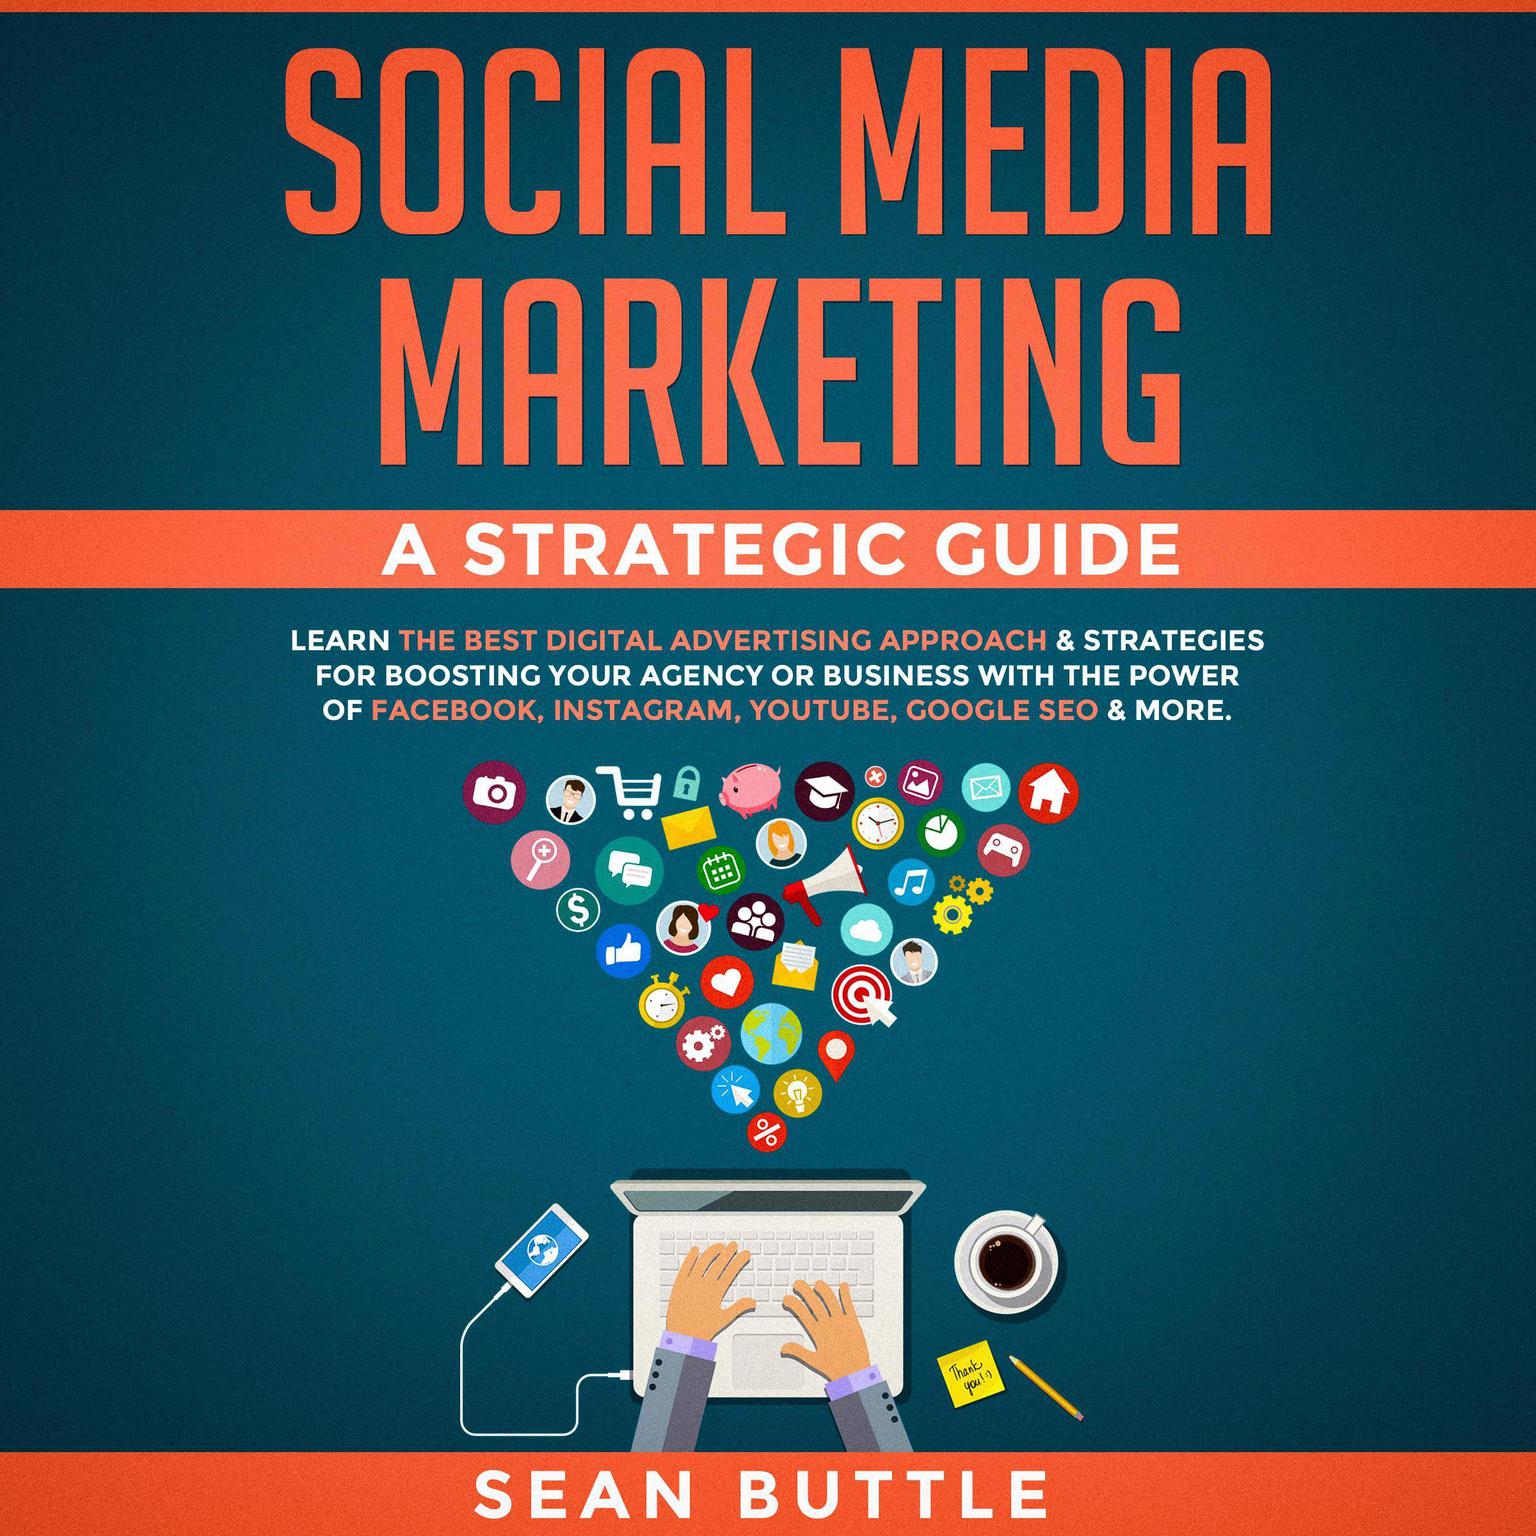 Social Media Marketing a Strategic Guide: Learn the Best Digital Advertising Approach & Strategies for Boosting Your Agency or Business with the Power of Facebook, Instagram, YouTube, Google SEO & More Audiobook, by Sean Buttle